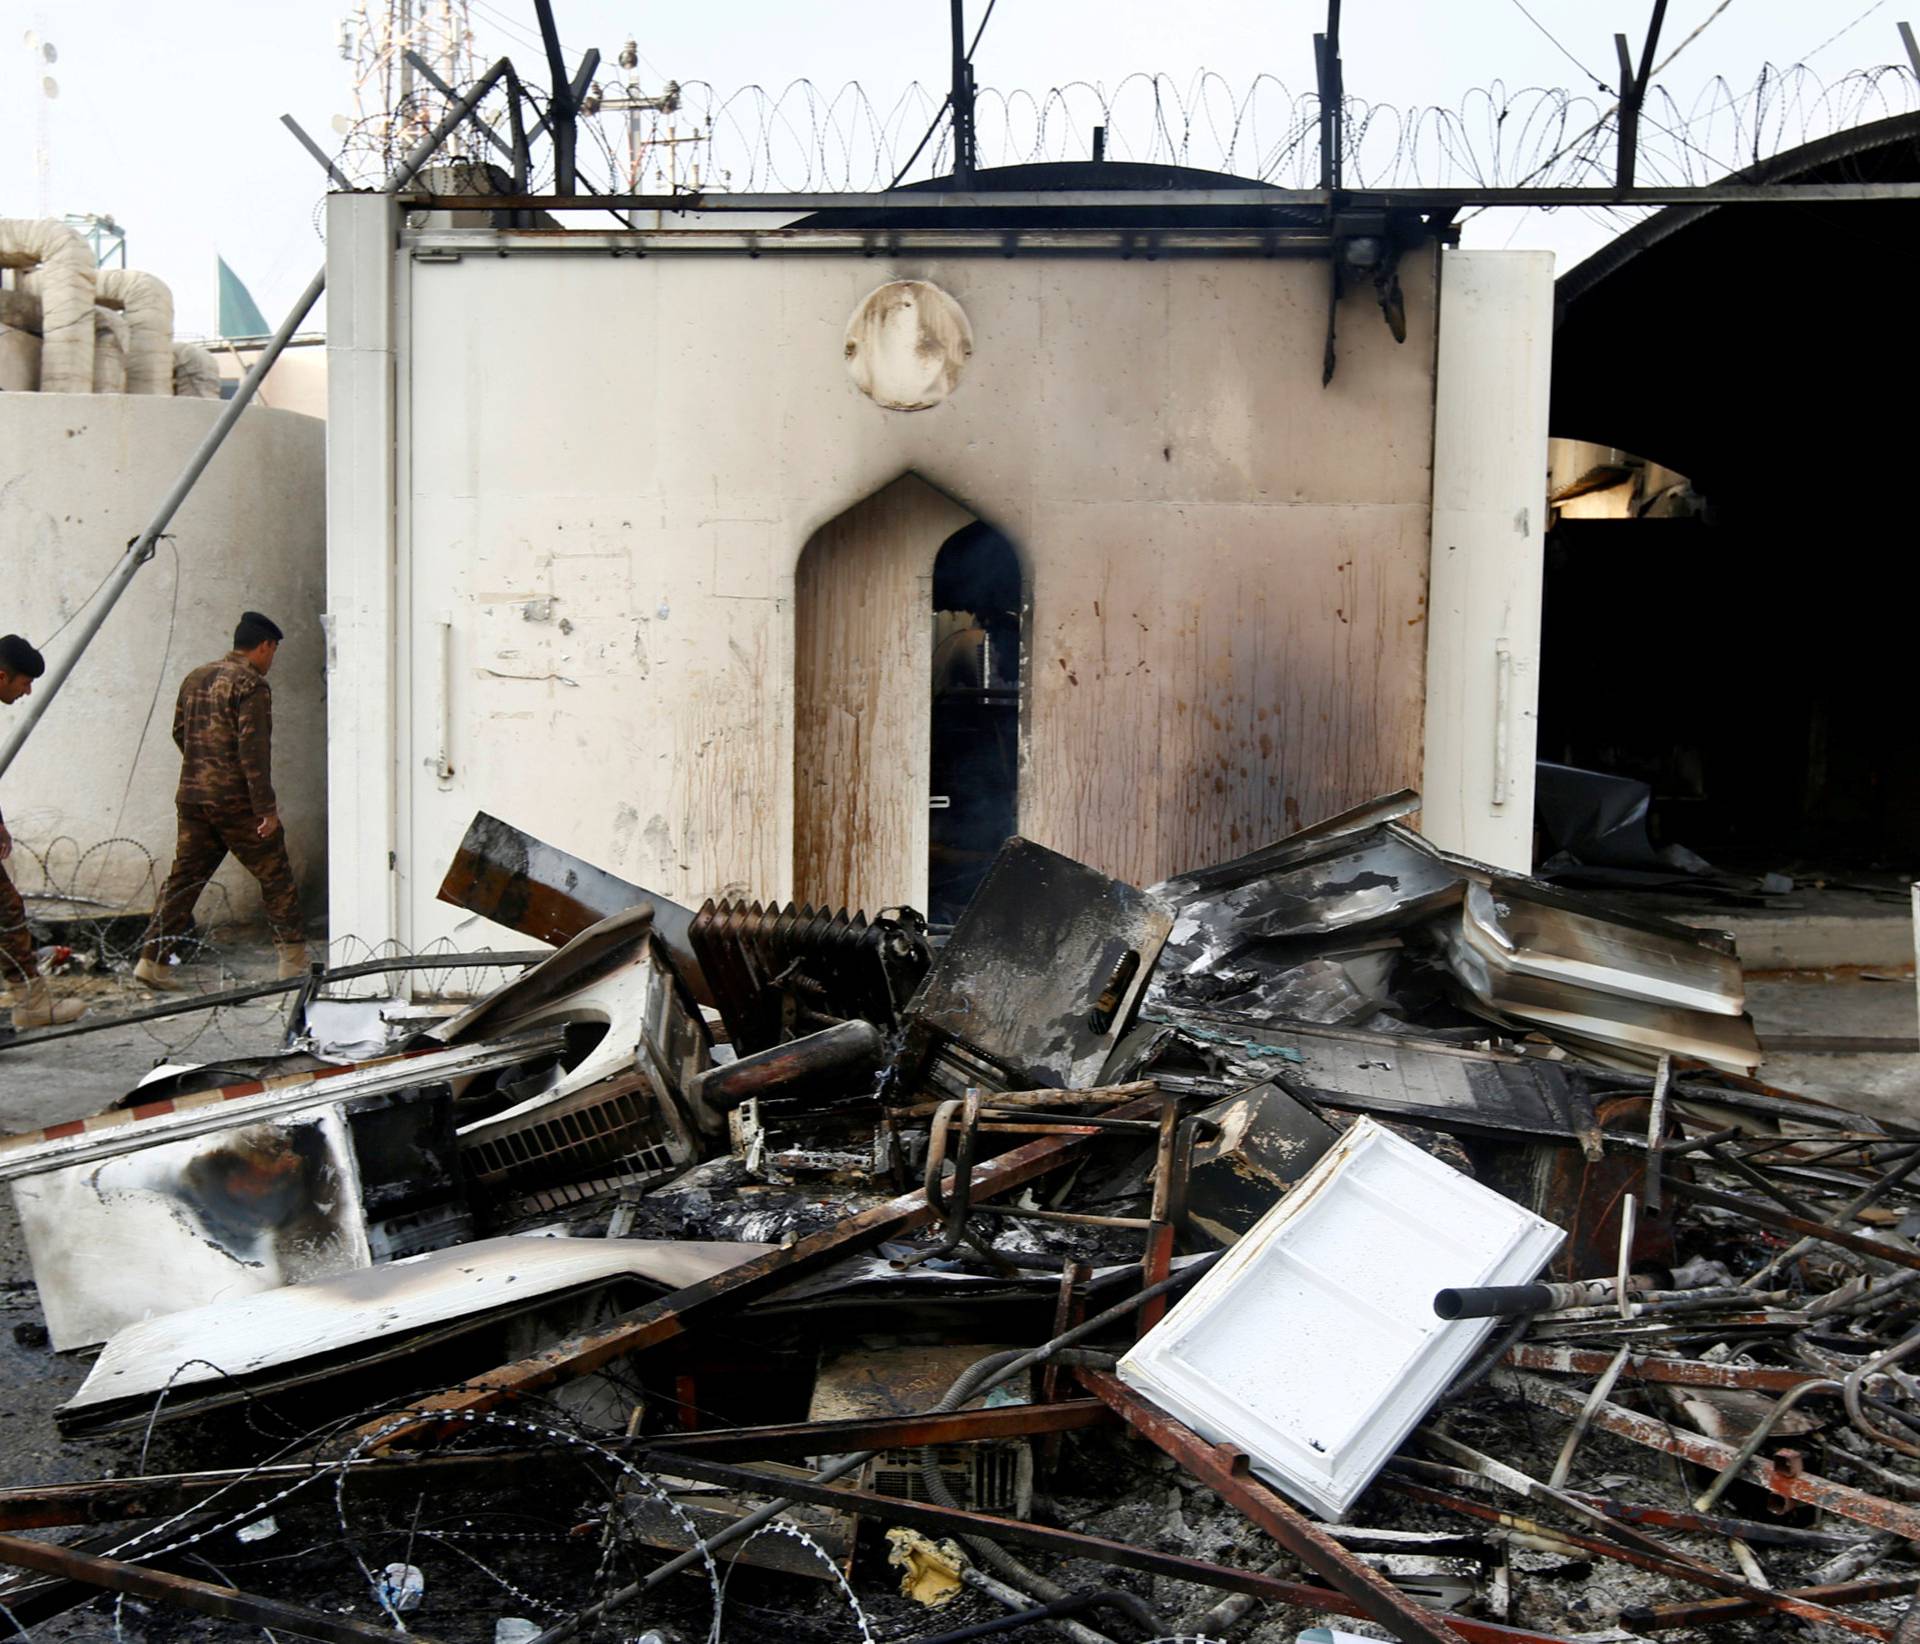 FILE PHOTO: A view of the Iranian consulate after Iraqi demonstrators stormed and set fire to the building during ongoing anti-government protests in Najaf